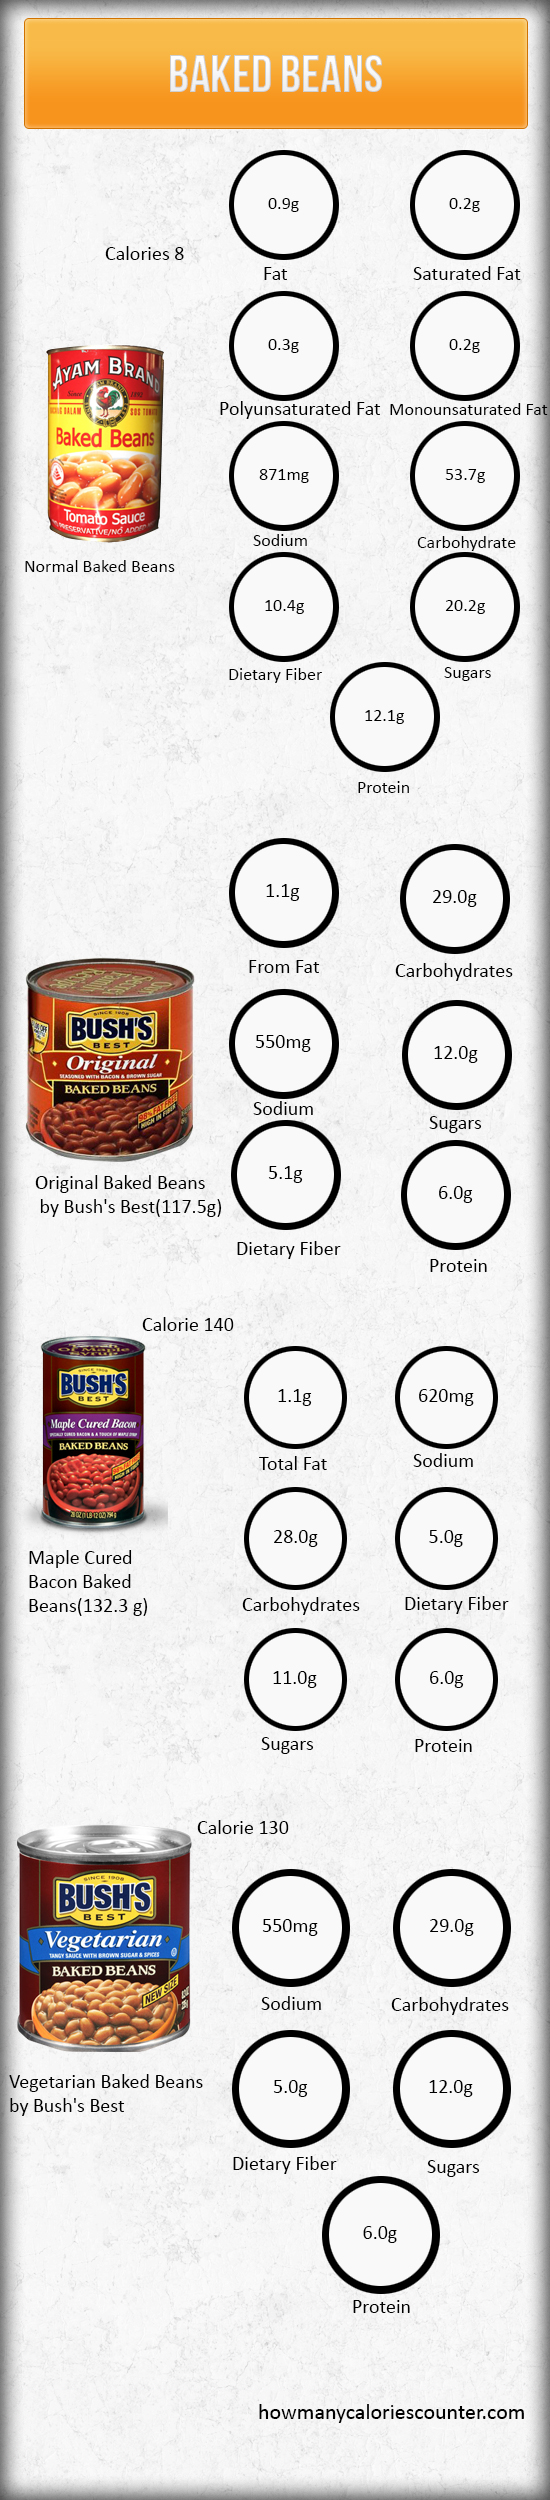 Calories in a Baked Beans